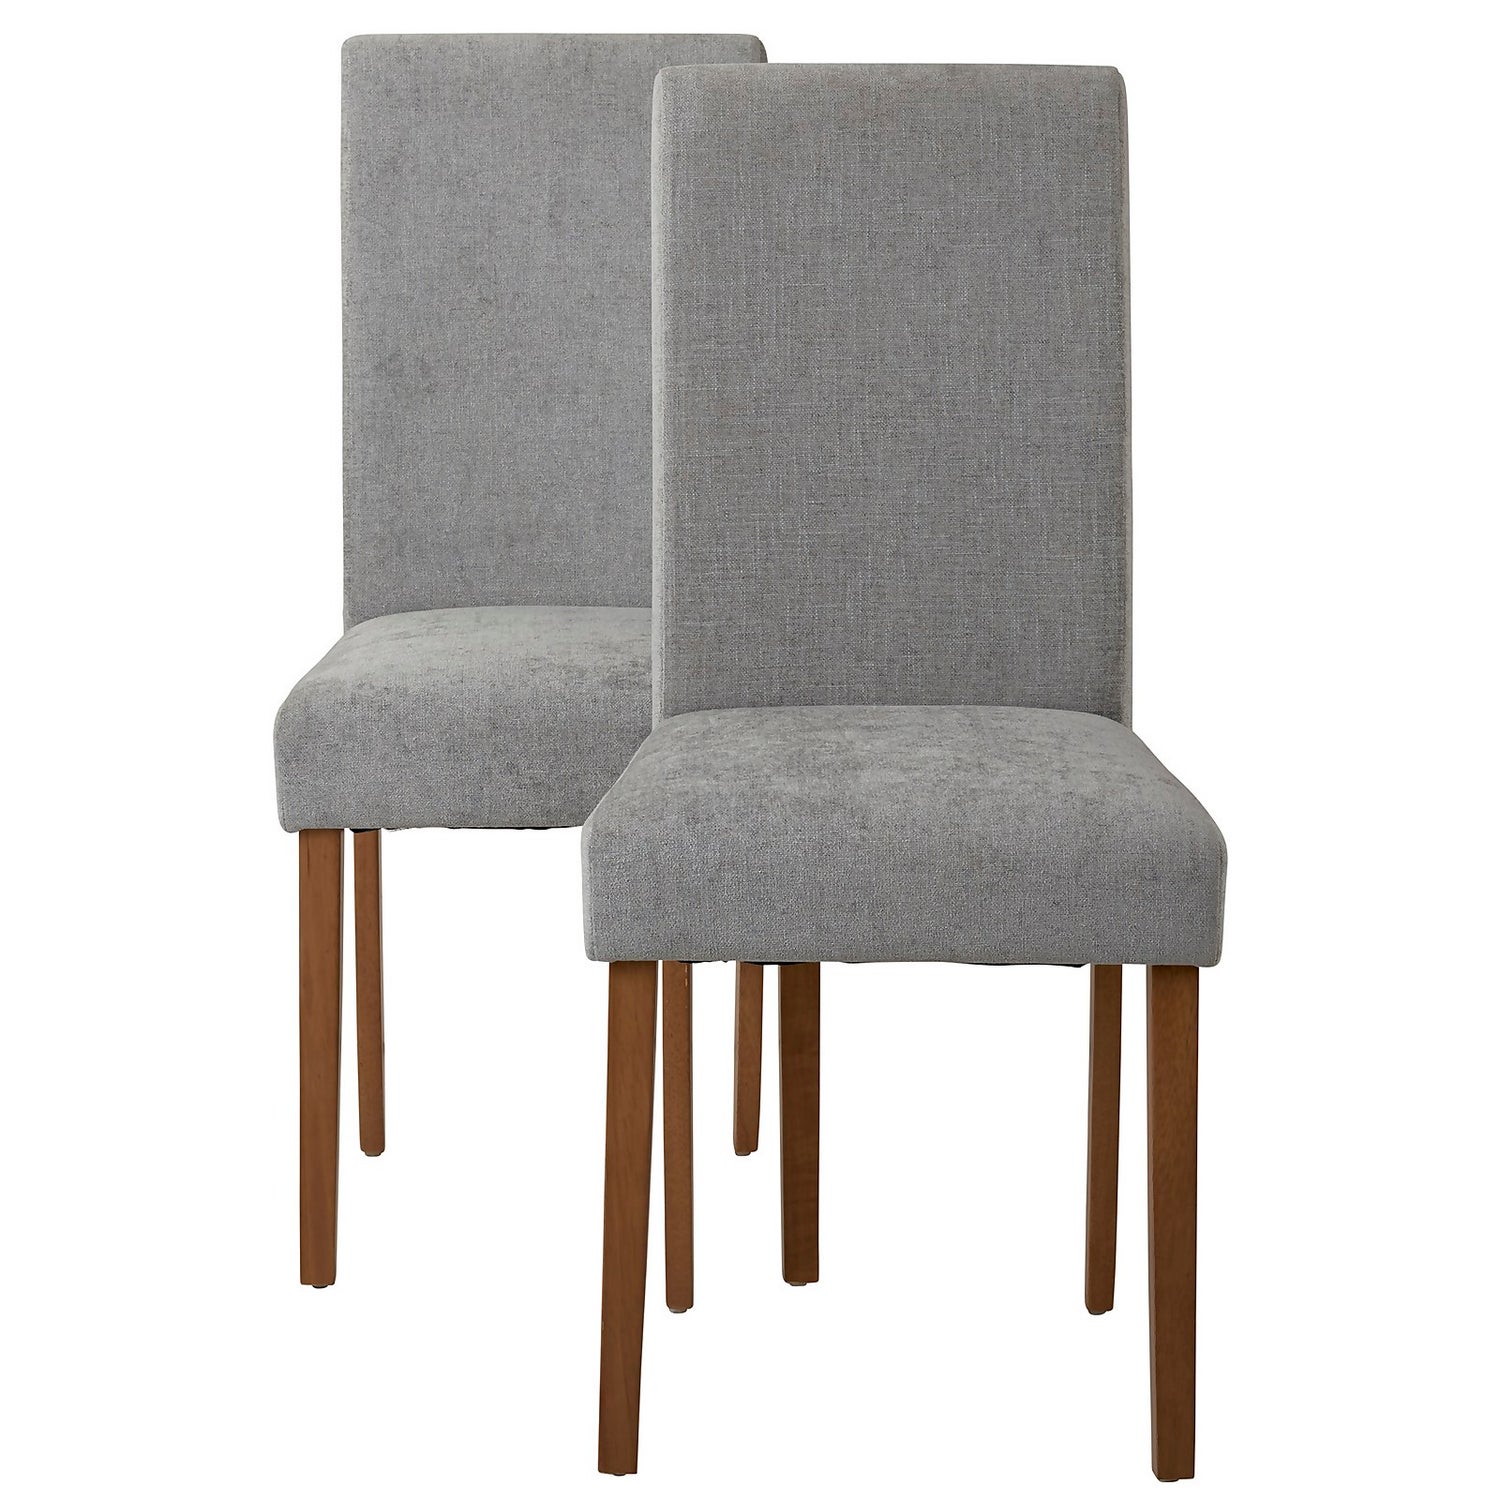 Chairs Diva Dining Chairs - Set of 2 - Grey | Homebase